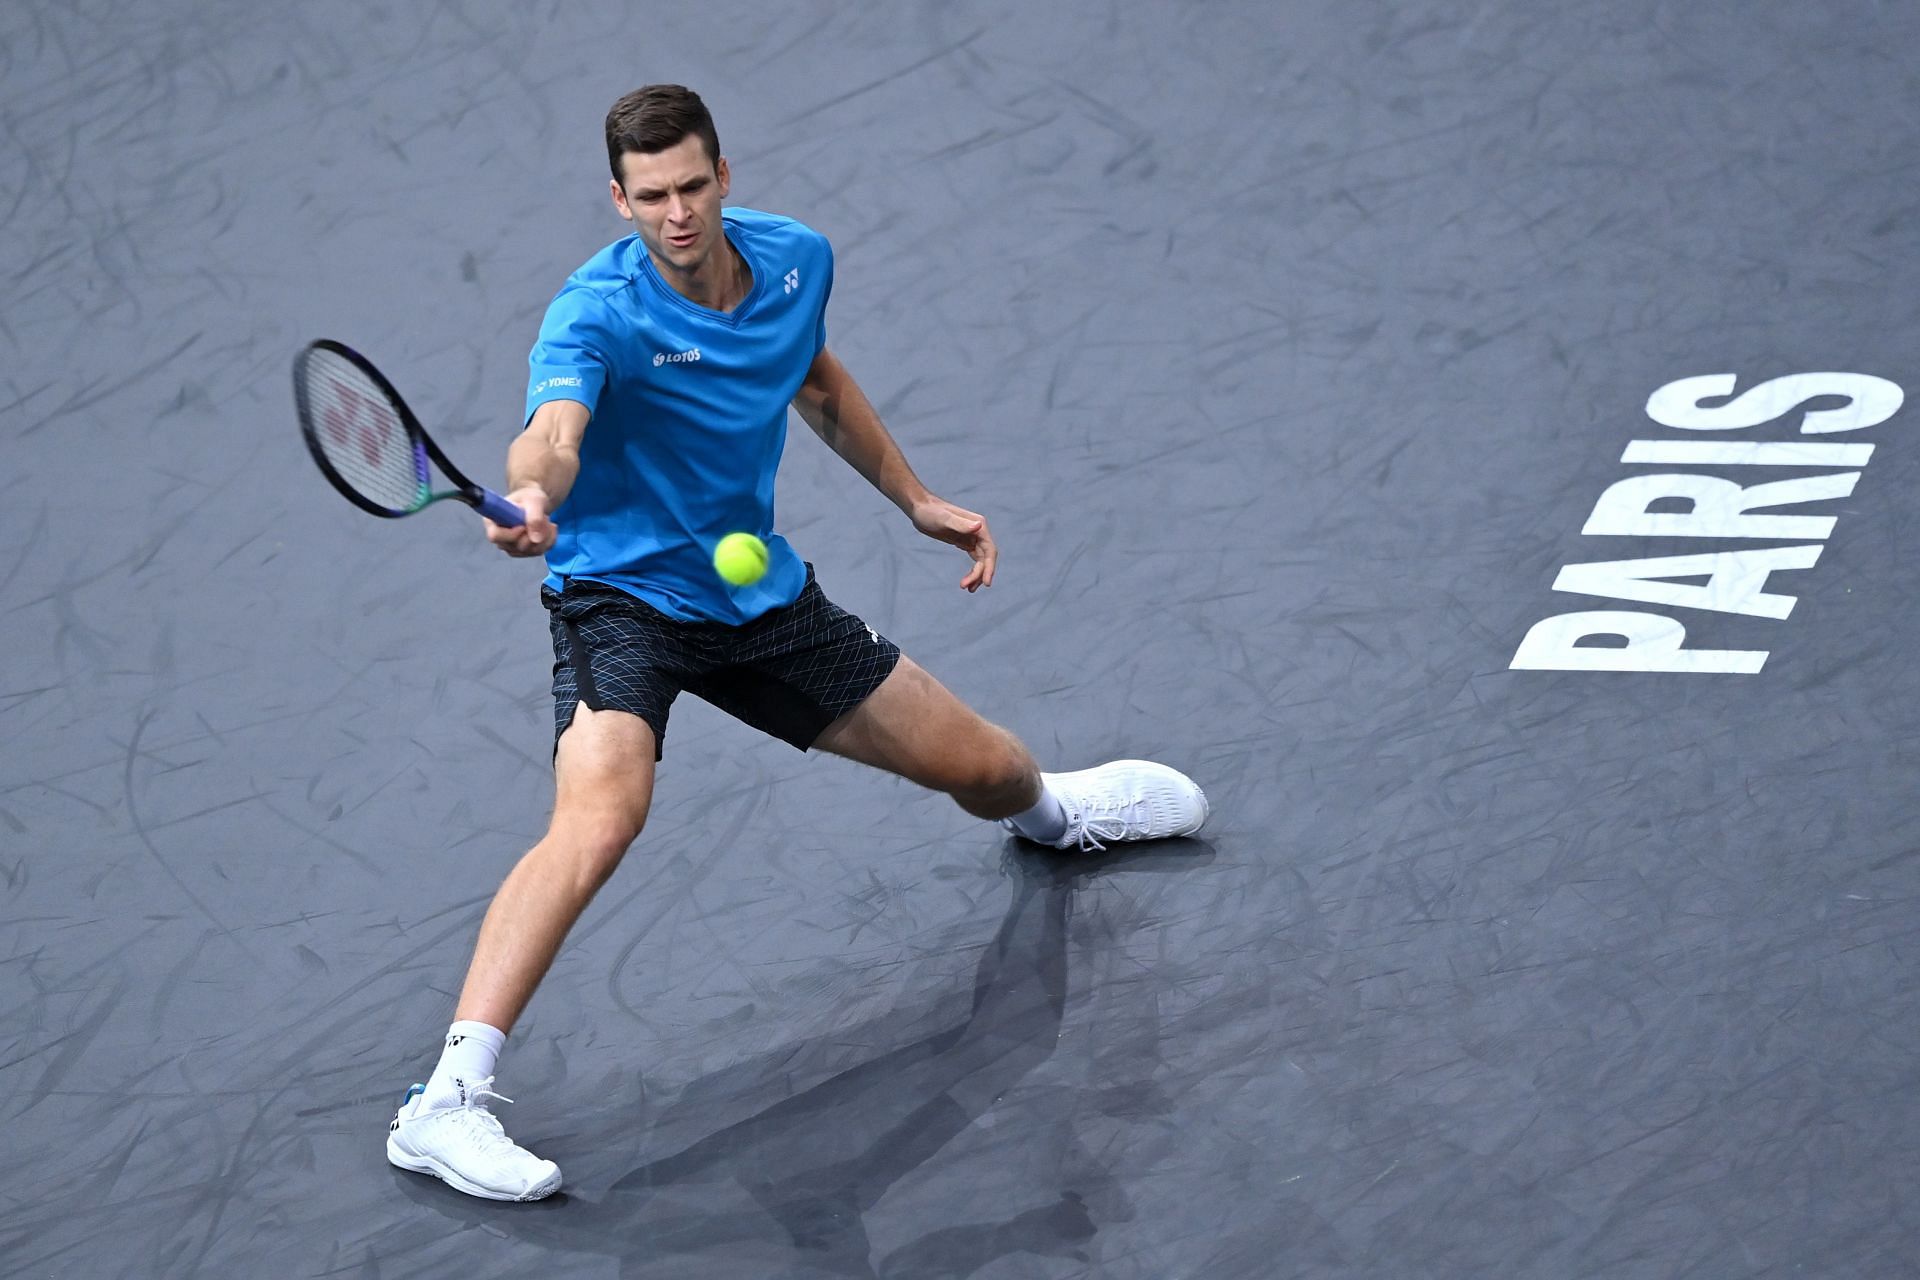 Hubert Hurkacz reached the semifinals at Paris, securing his spot in the ATP finals.